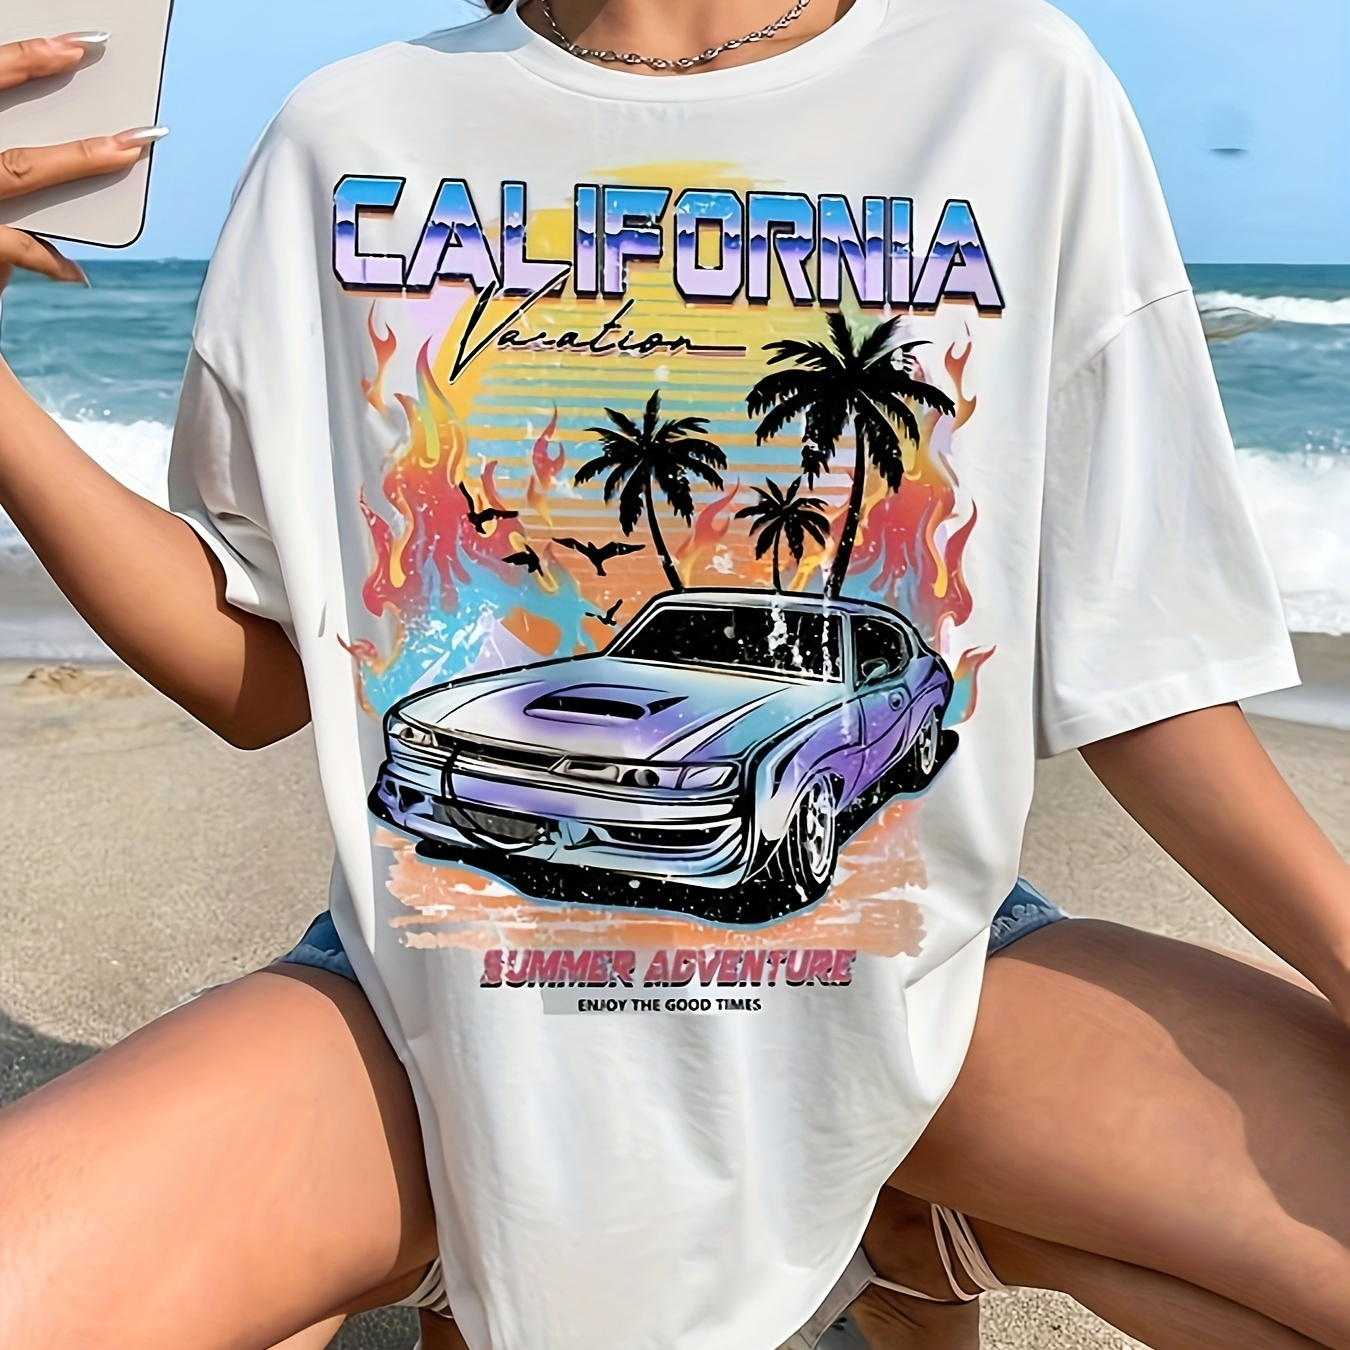 

Coconut Tree & Car Print Drop Shoulder T-shirt, Short Sleeve Crew Neck Casual Top For Spring & Summer, Women's Clothing